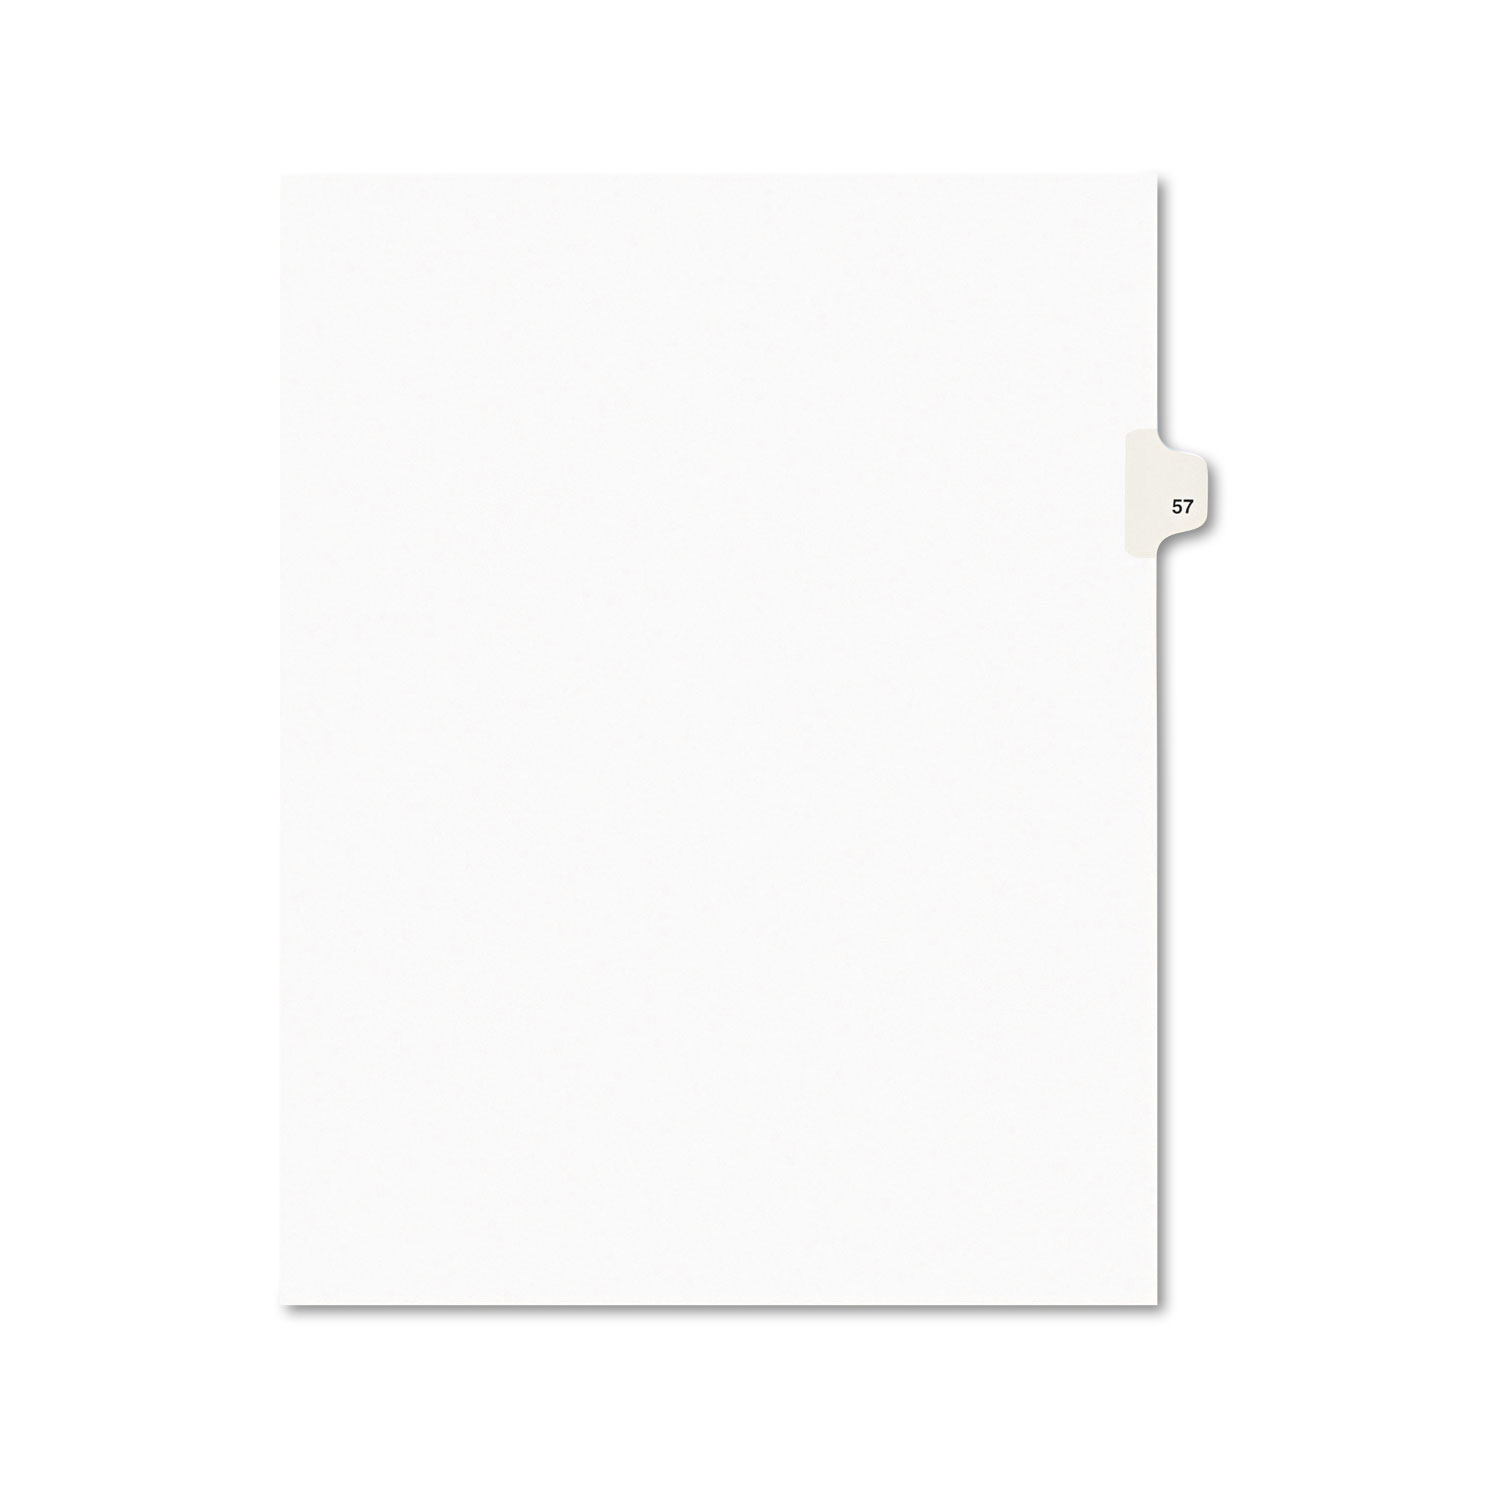  Avery 01057 Preprinted Legal Exhibit Side Tab Index Dividers, Avery Style, 10-Tab, 57, 11 x 8.5, White, 25/Pack (AVE01057) 